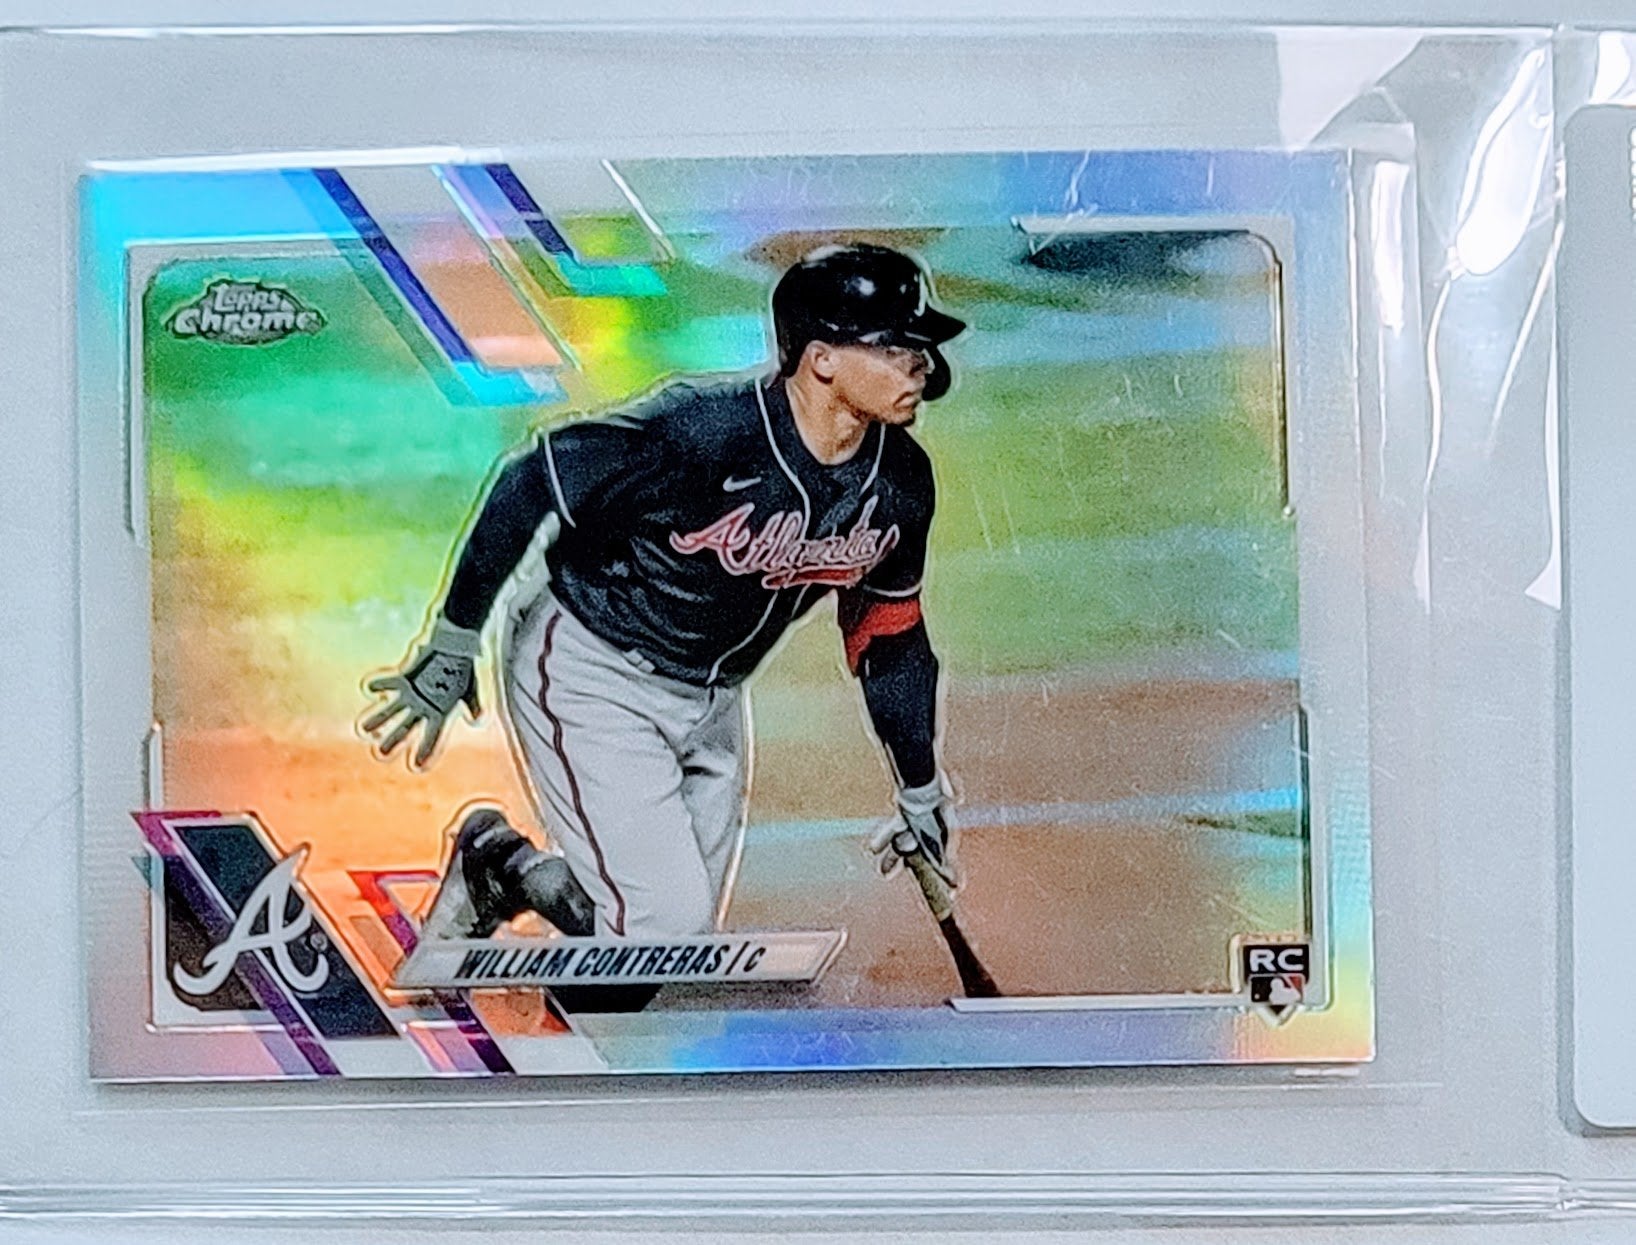 2021 Topps Chrome William Contreras Refractor Baseball Trading Card TPTV simple Xclusive Collectibles   